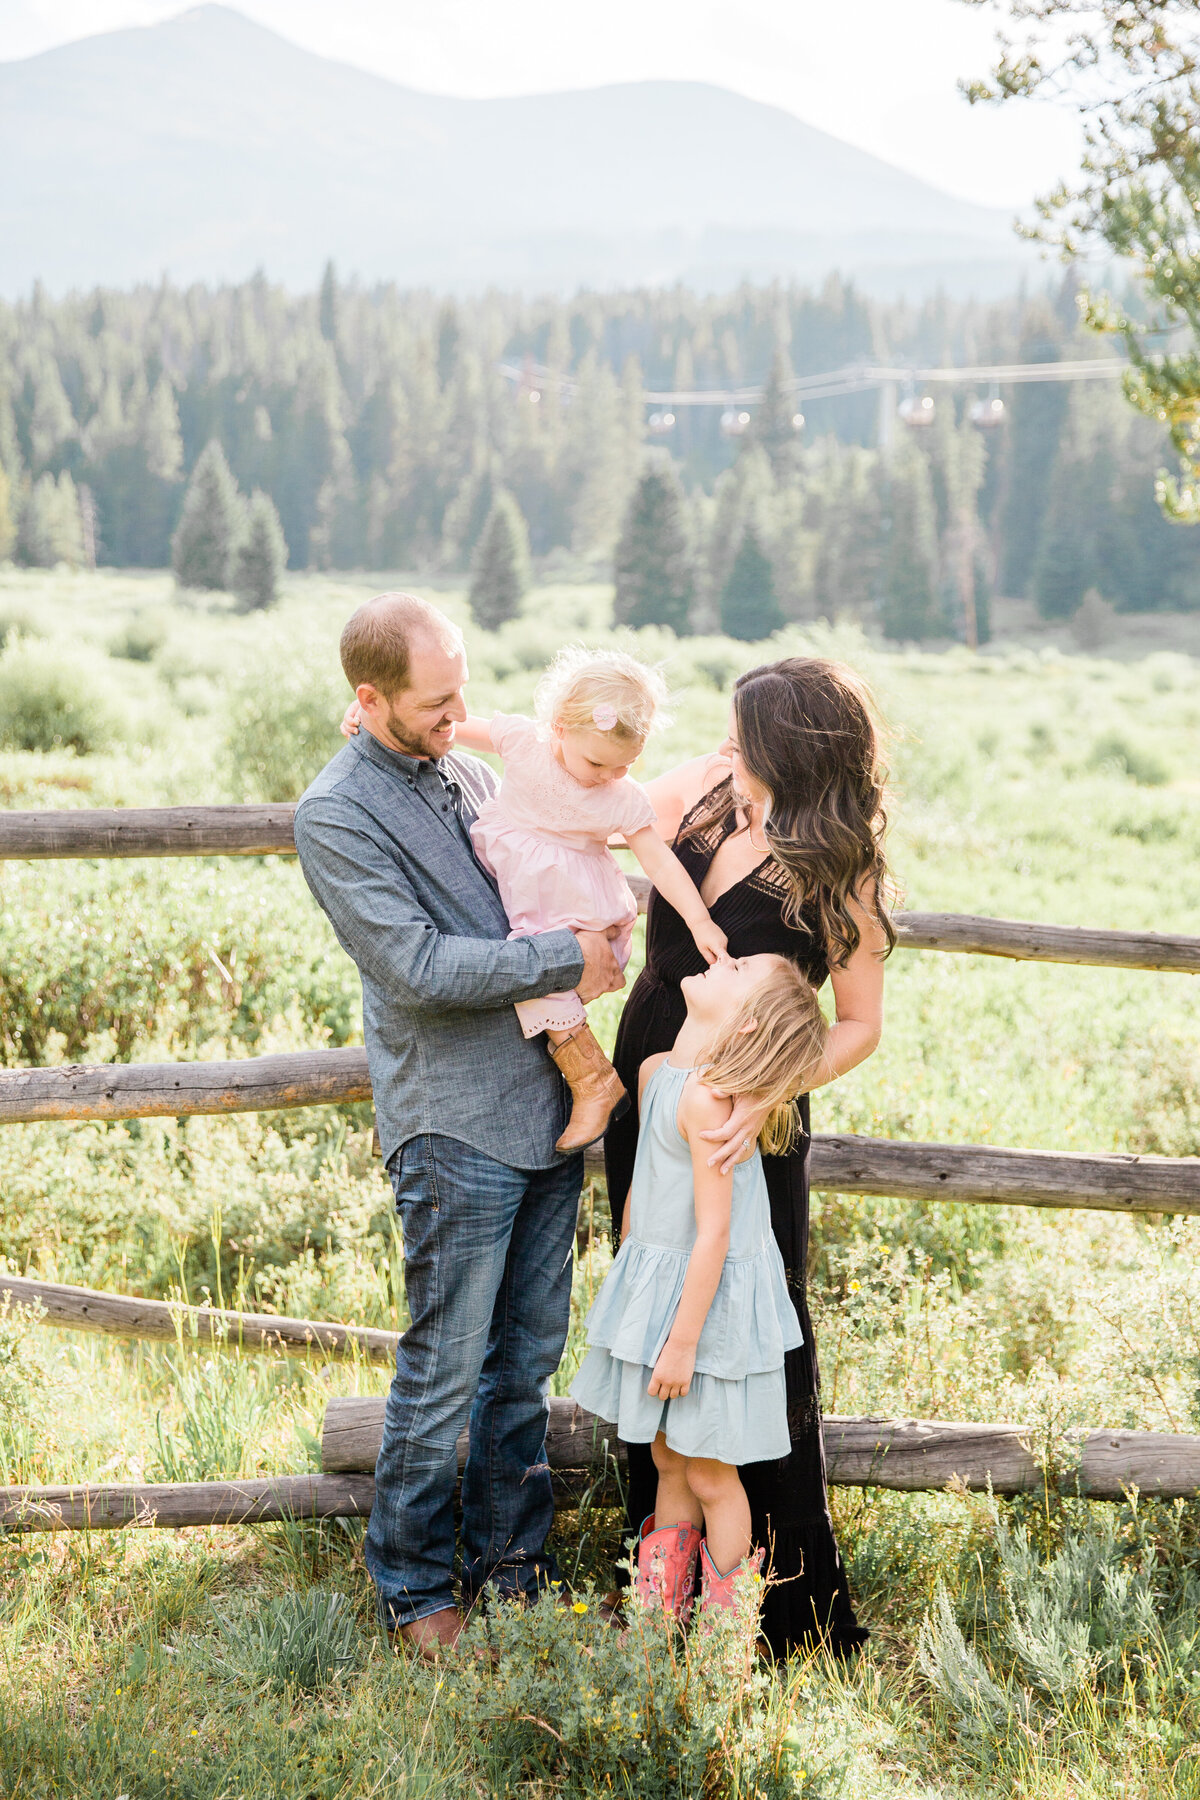 This family of four is all looking at one another and smiling. There is a log fence behind them with a wide open field and Breckenridge Mountain behind them